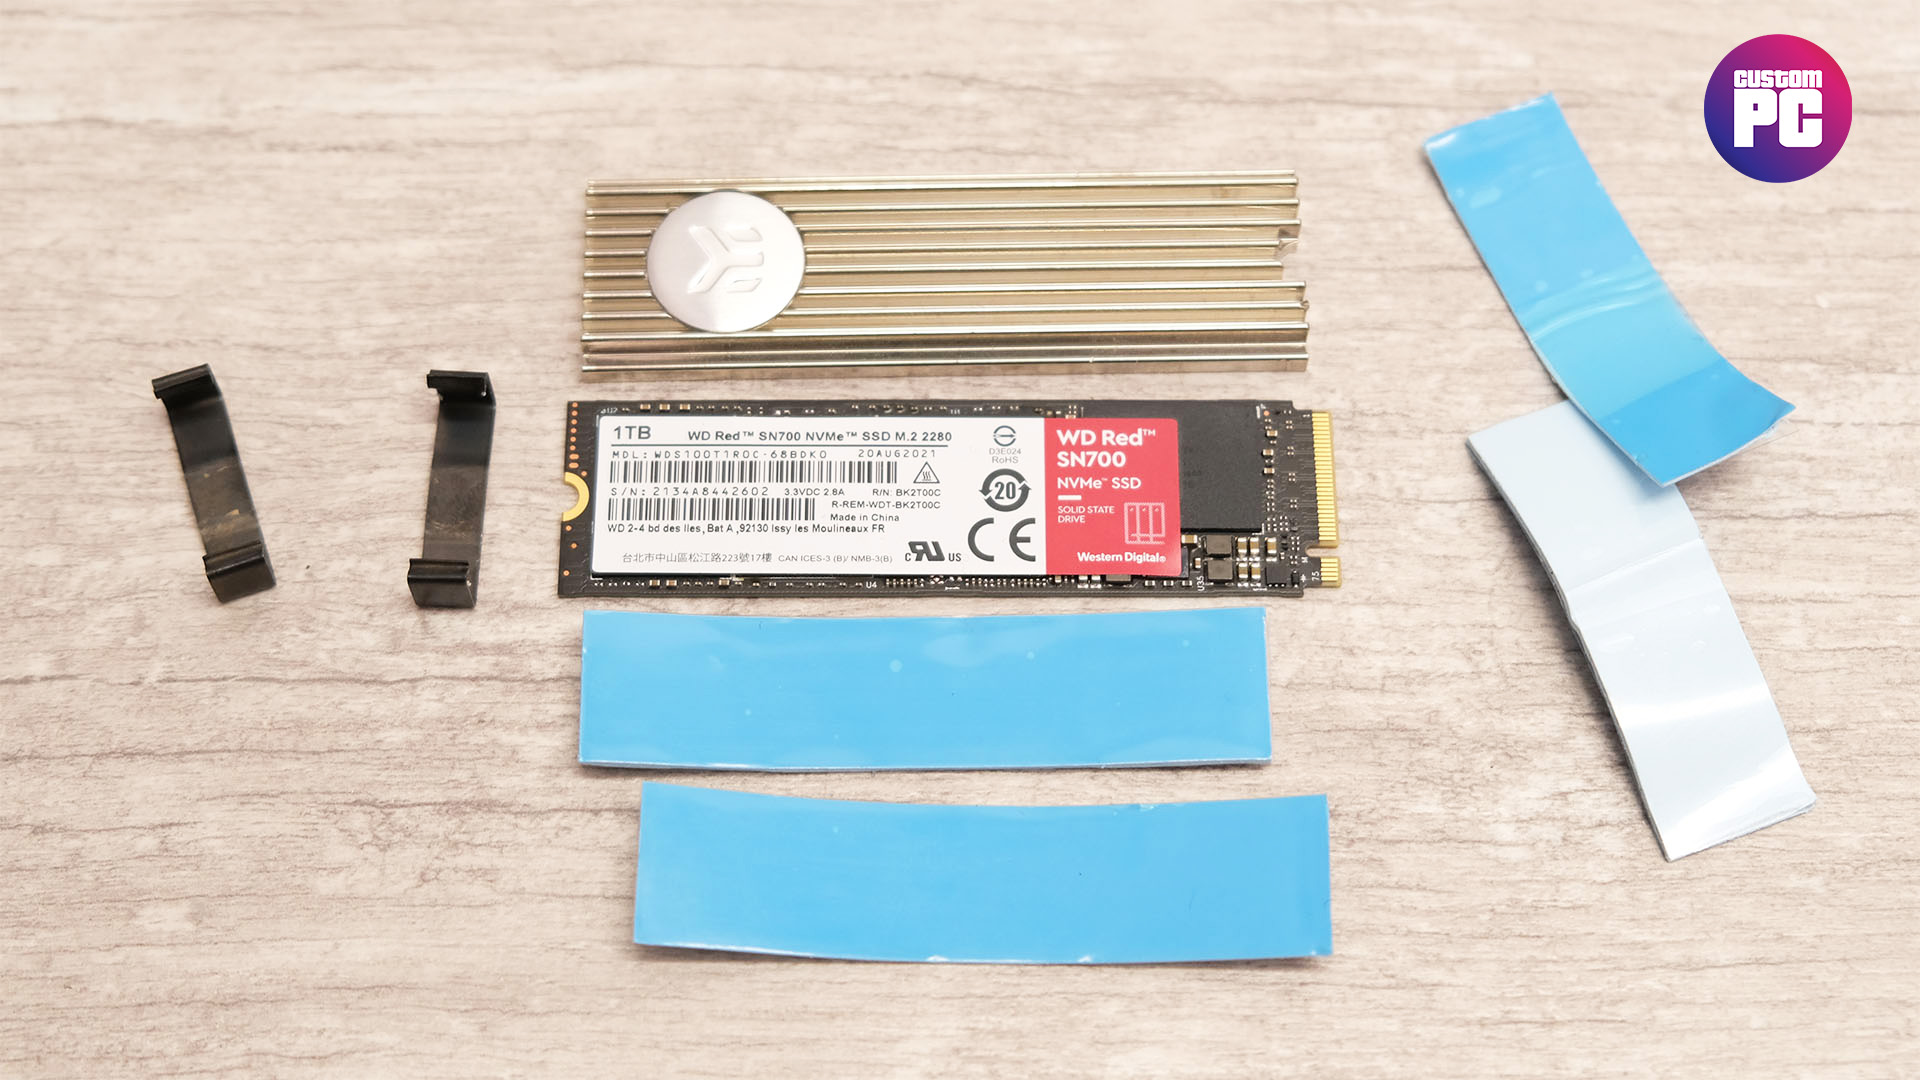 How to install an M.2 SSD and heatsink